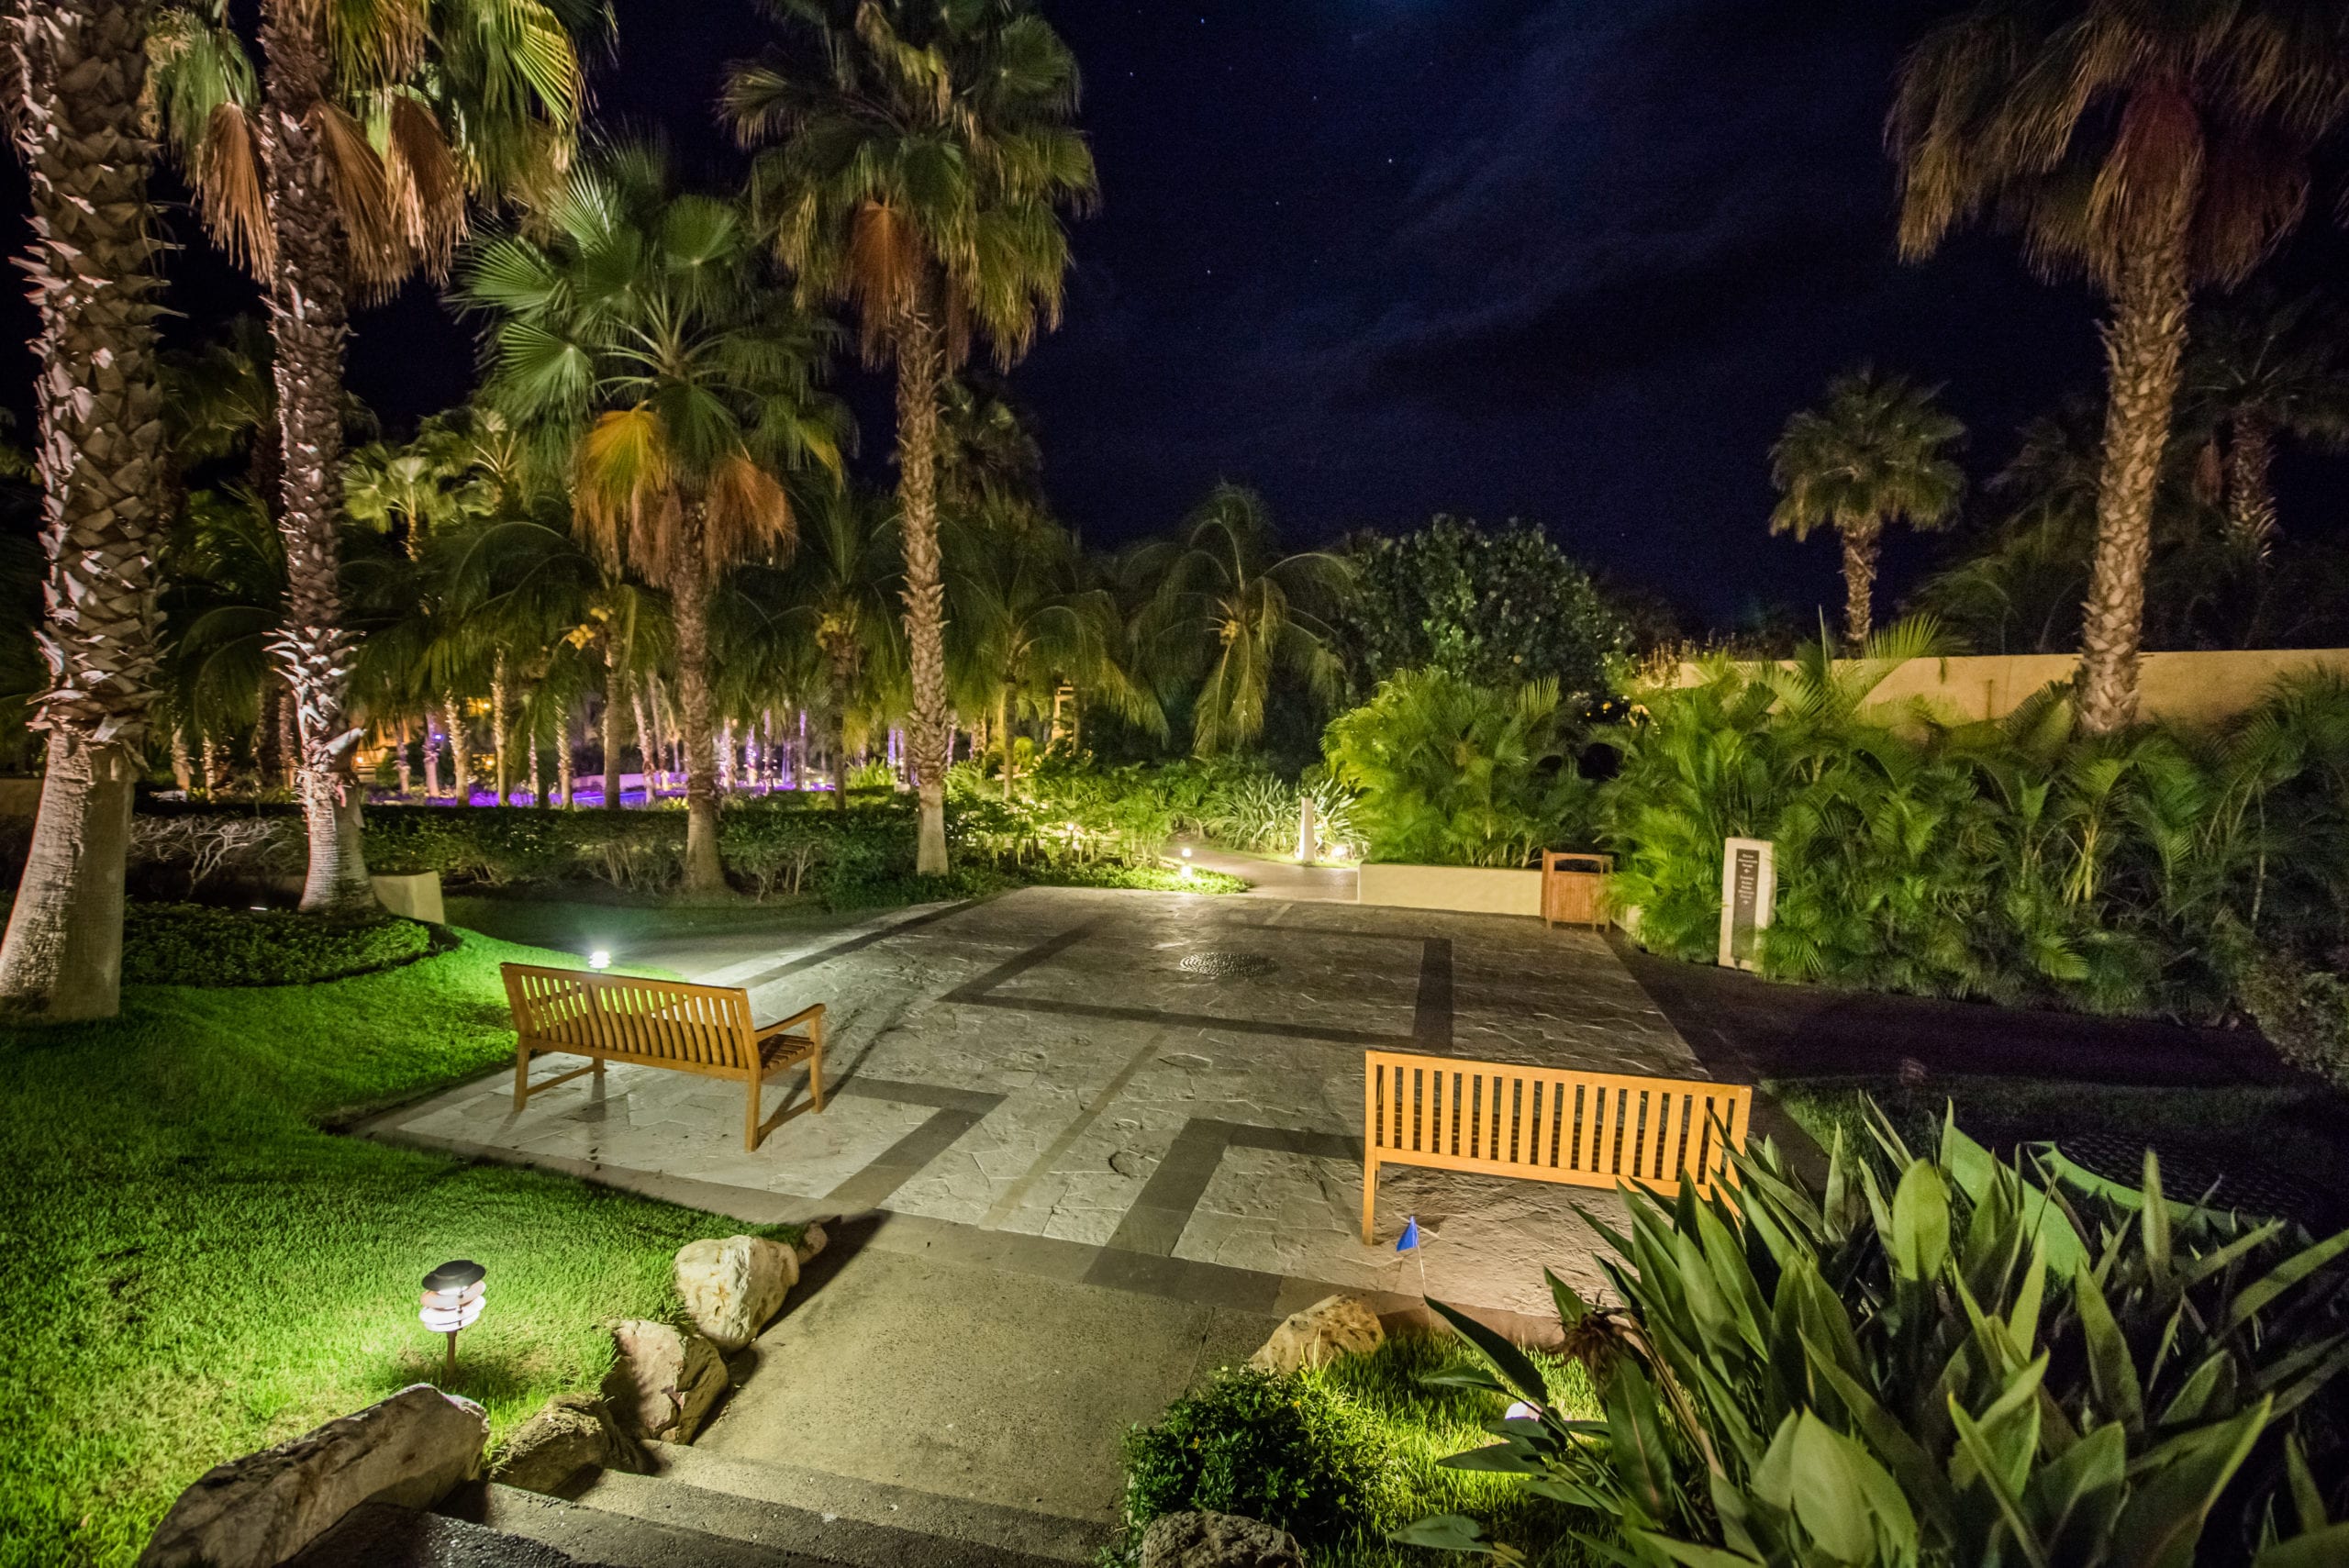 St Regis Walkway with benches and stairs lit up at night surrounded by palm trees and foliage